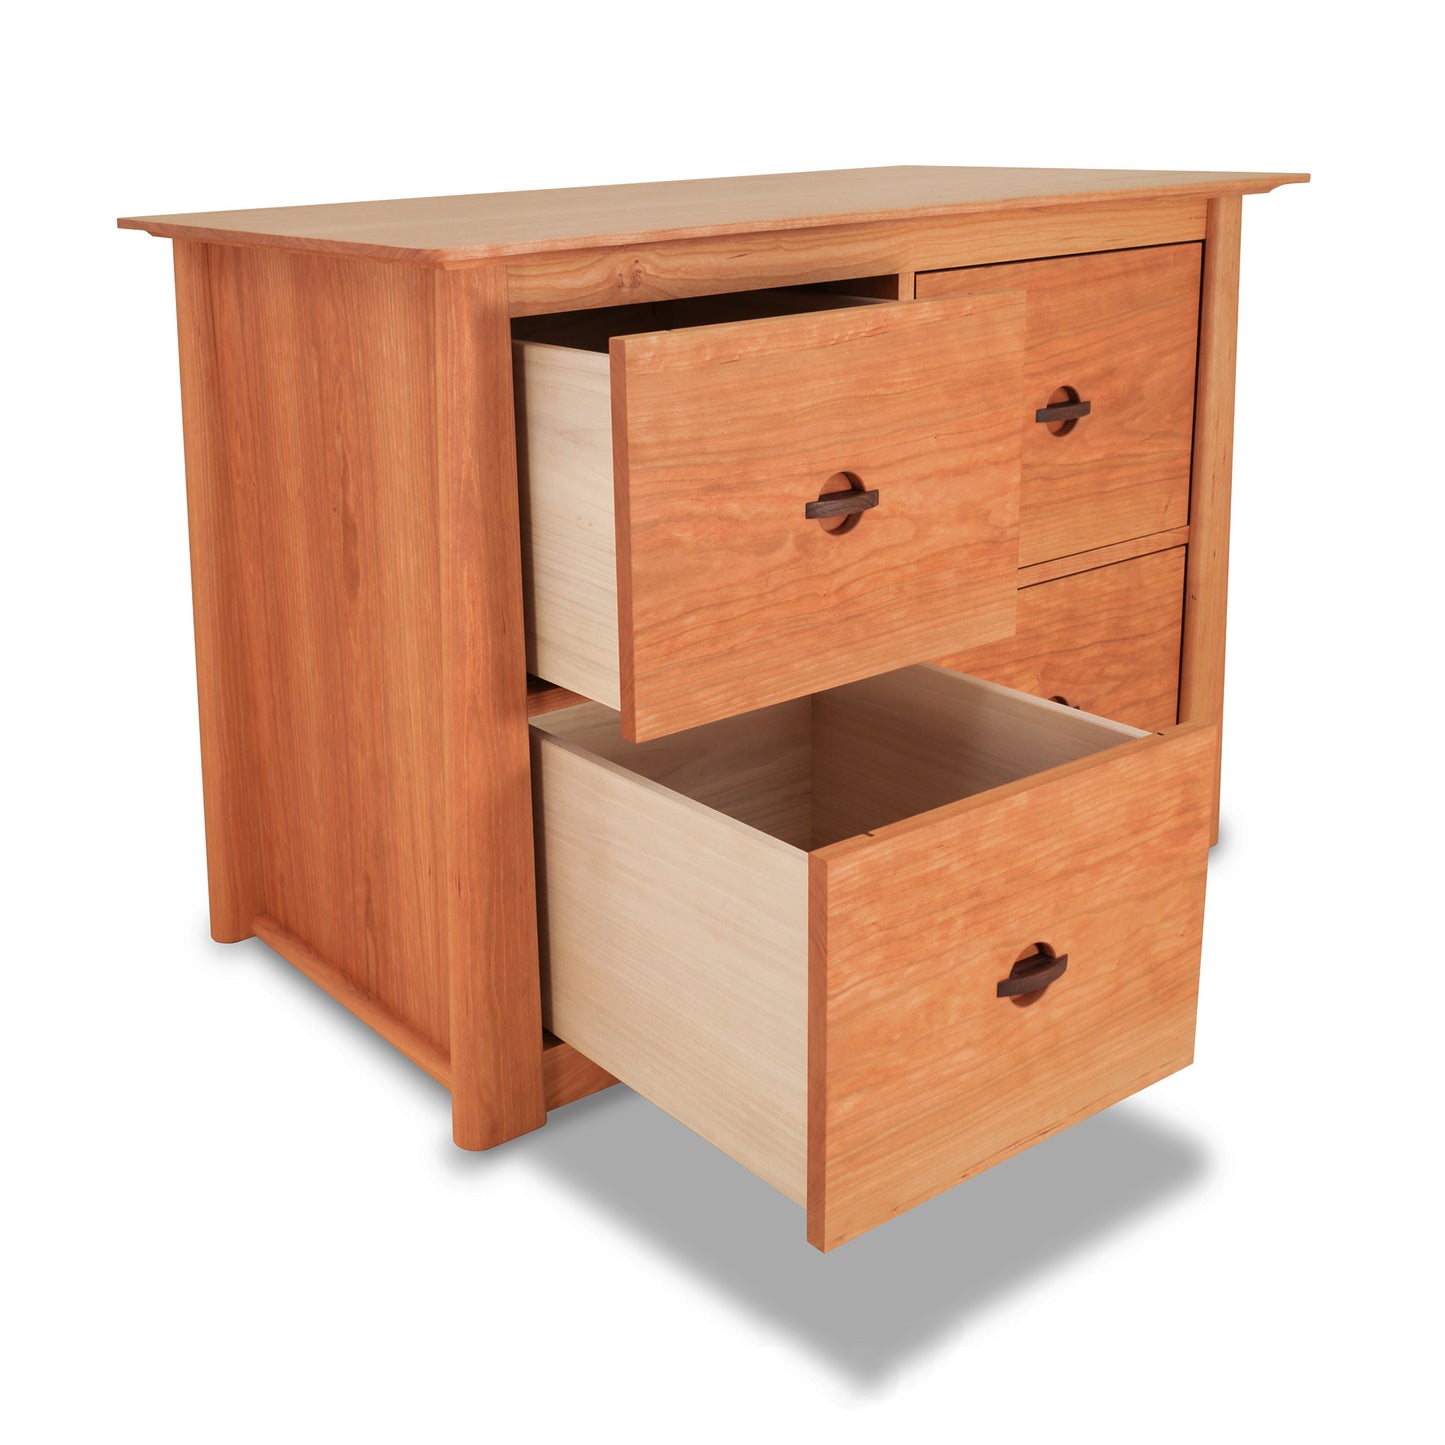 A luxury Cherry Moon 4-Drawer File Credenza by Maple Corner Woodworks with two drawers perfect for office use.